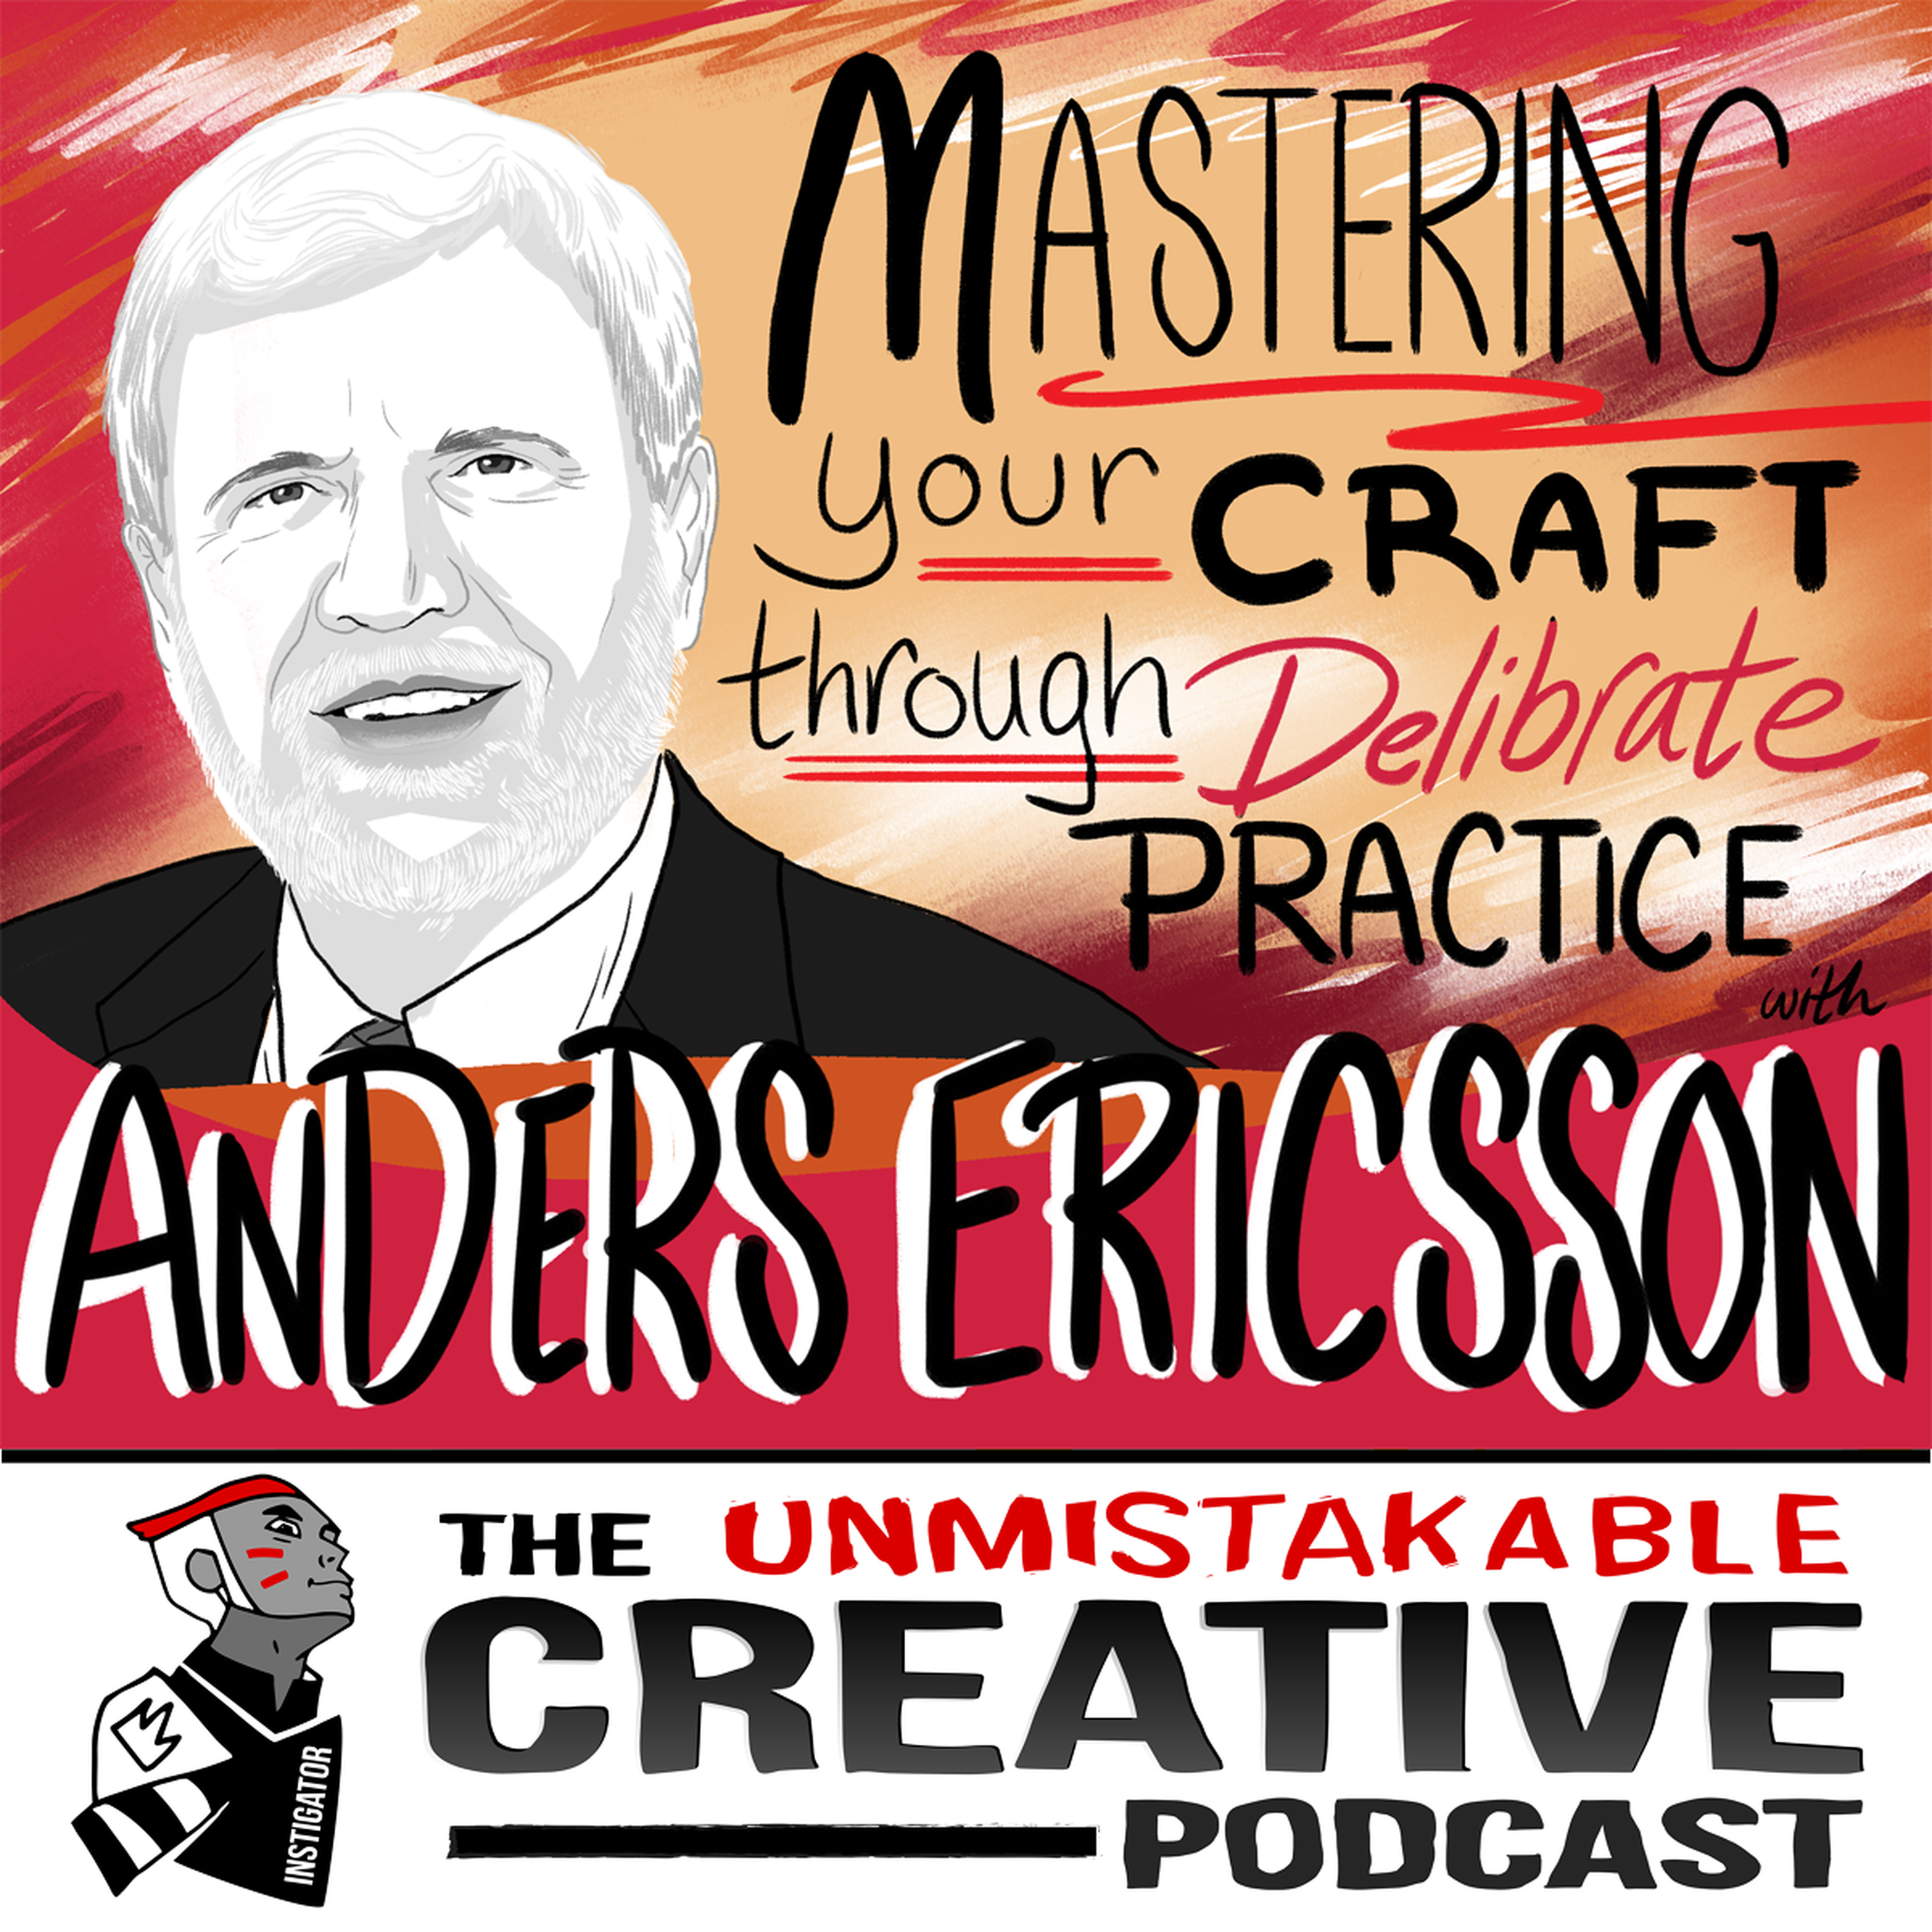 Anders Ericsson: Mastering Your Craft Through Deliberate Practice Image